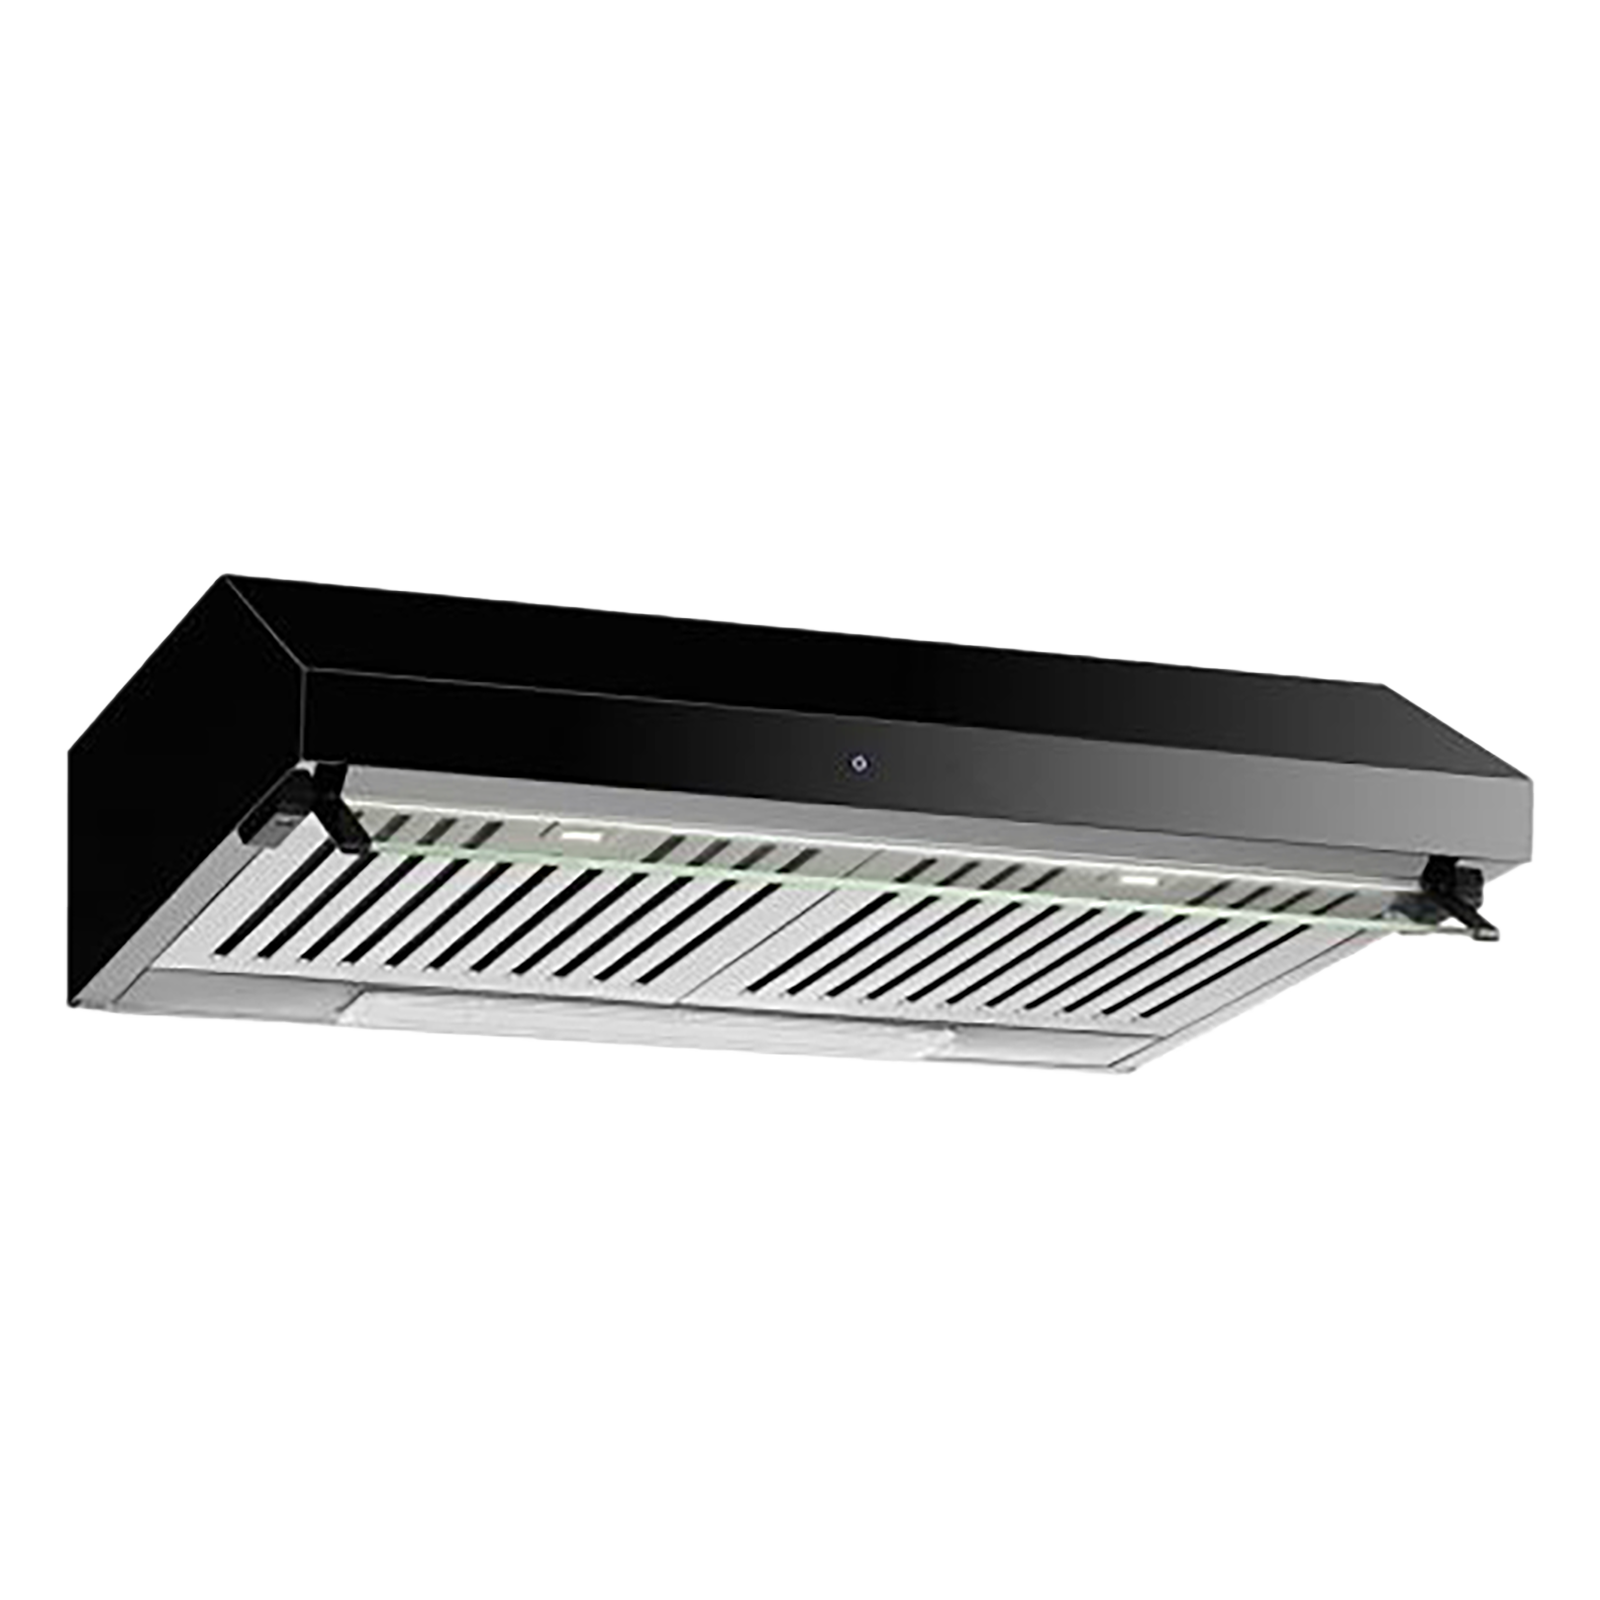 Faber Hood Ruby XL 700 m³/hr 60cm Wall Mount Chimney (Baffle Filter, TC BK 60, Stainless Steel)_1